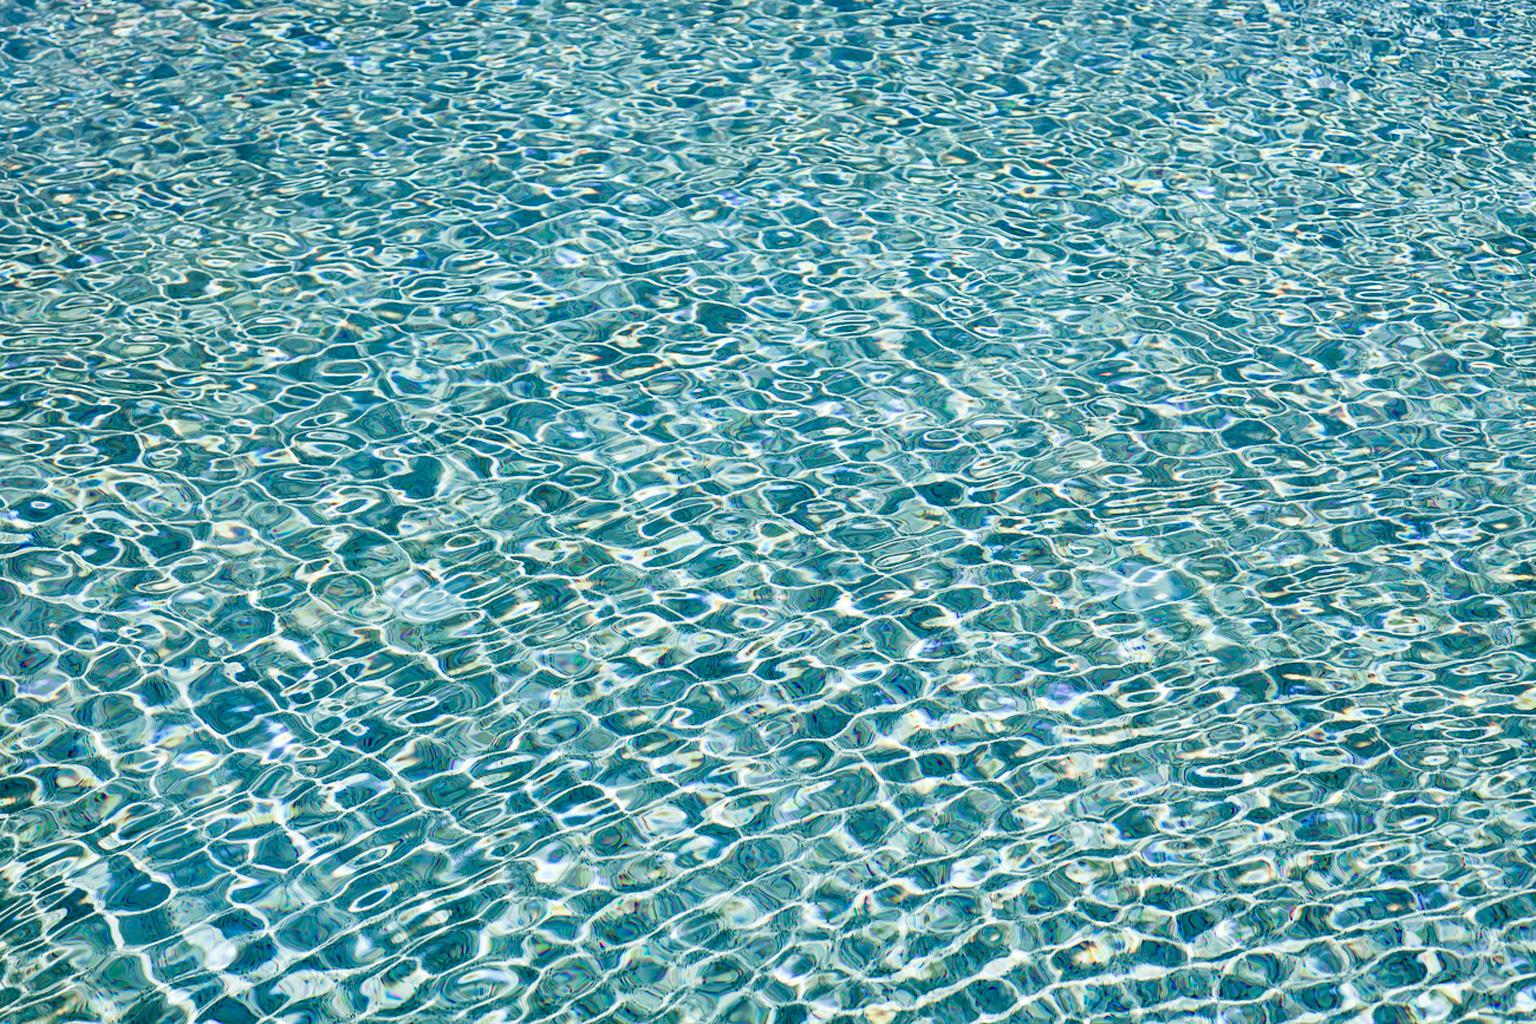 Erik Pawassar Abstract Print - H2O ll -large format photograph of sun reflections on pool water surface